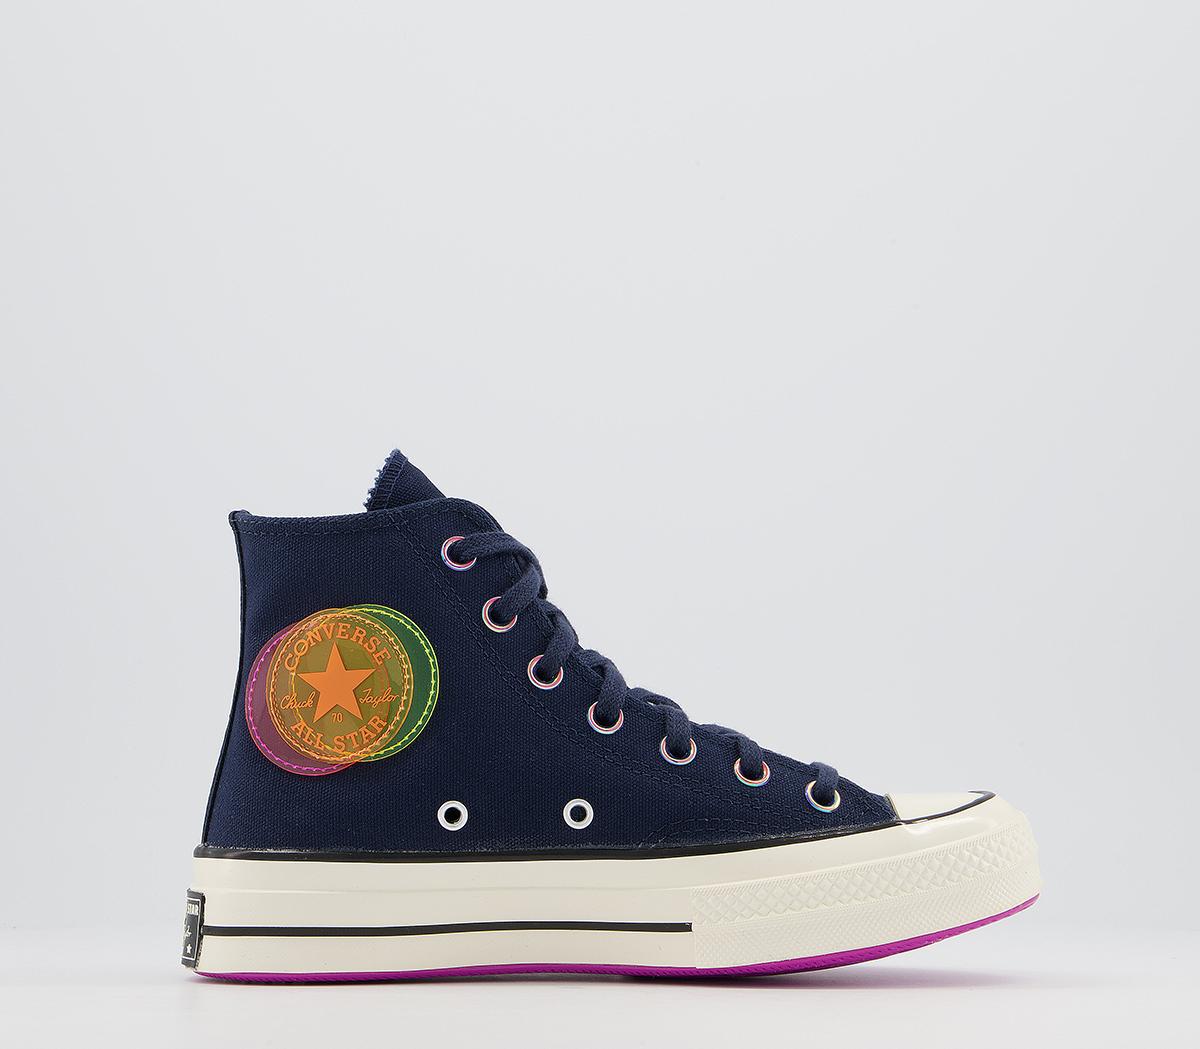 ConverseAll Star Hi 70s TrainersObsidian Bold Citron Multi Patch